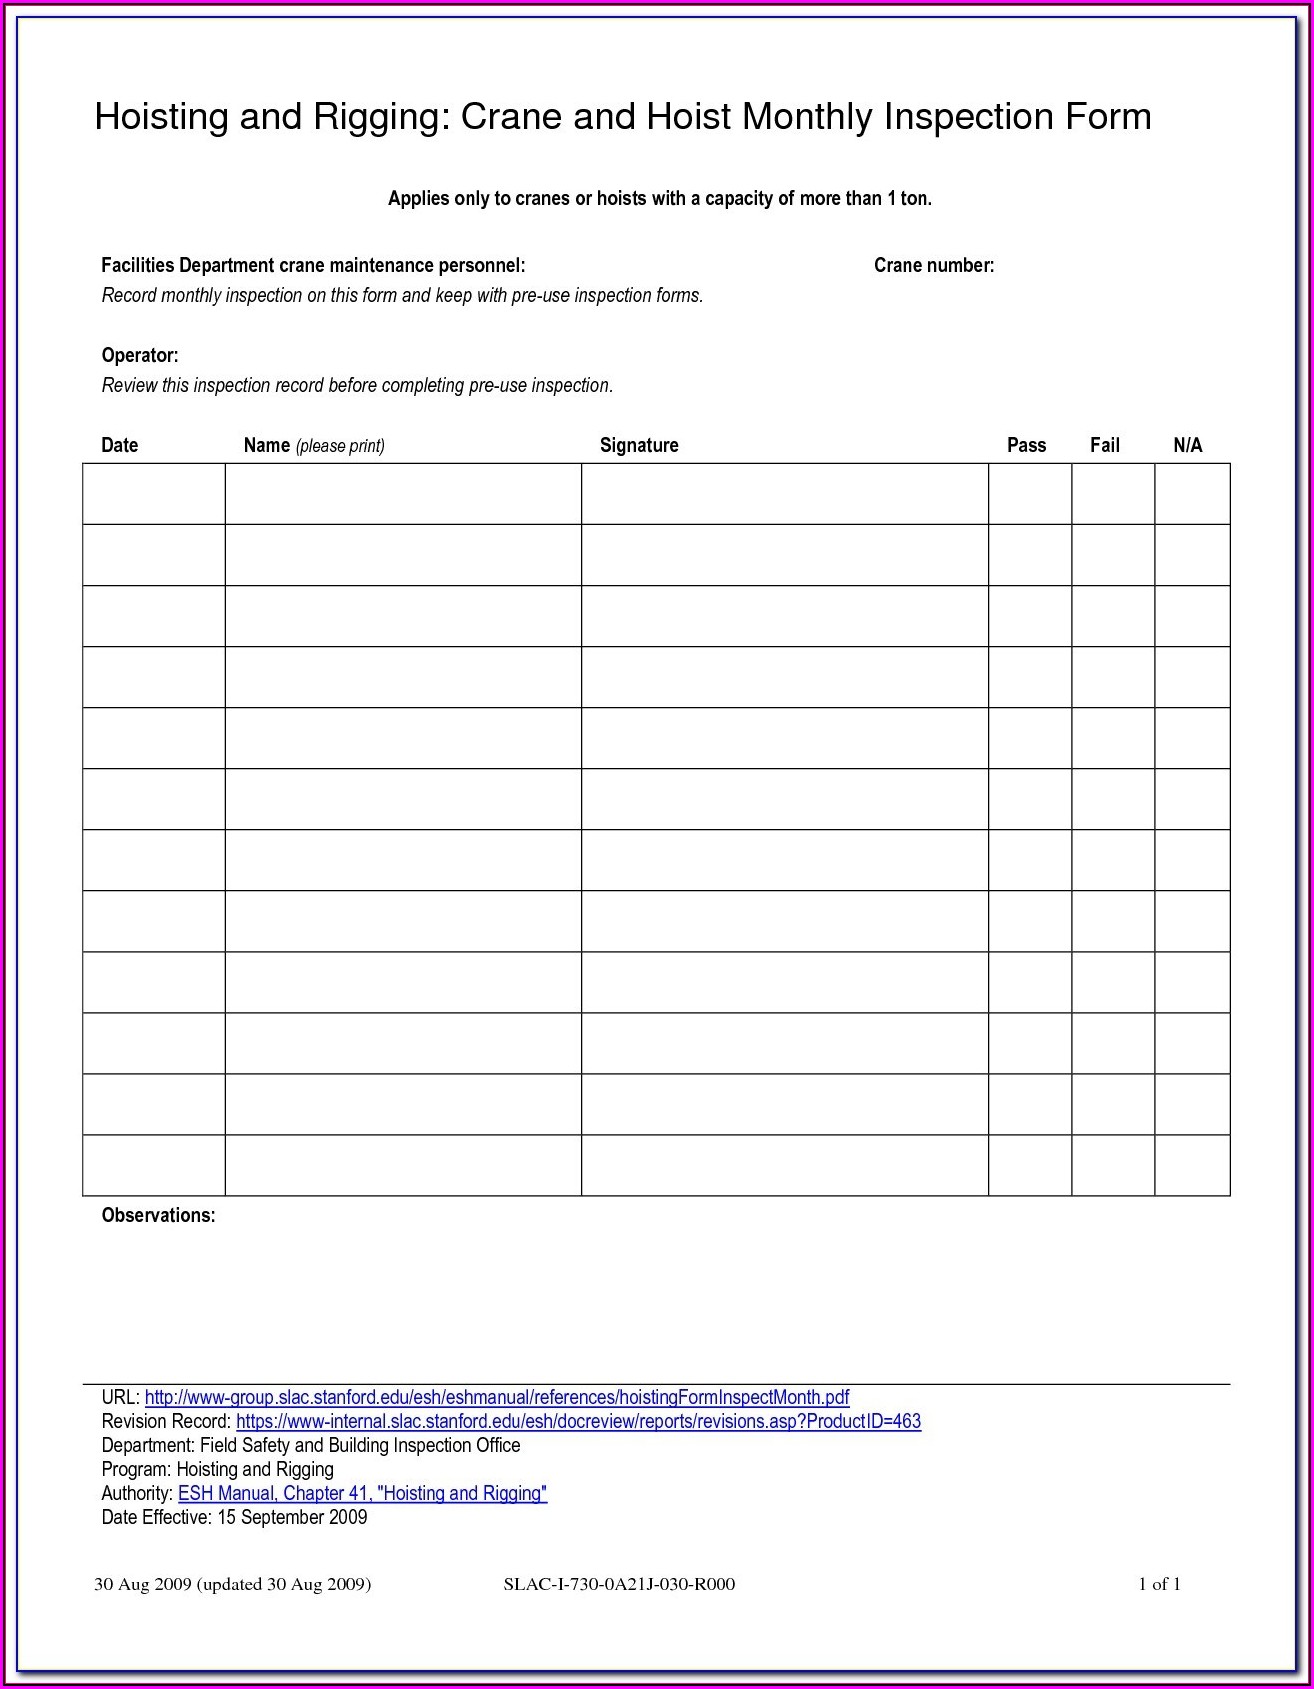 Lock Out Tag Out Forms Osha